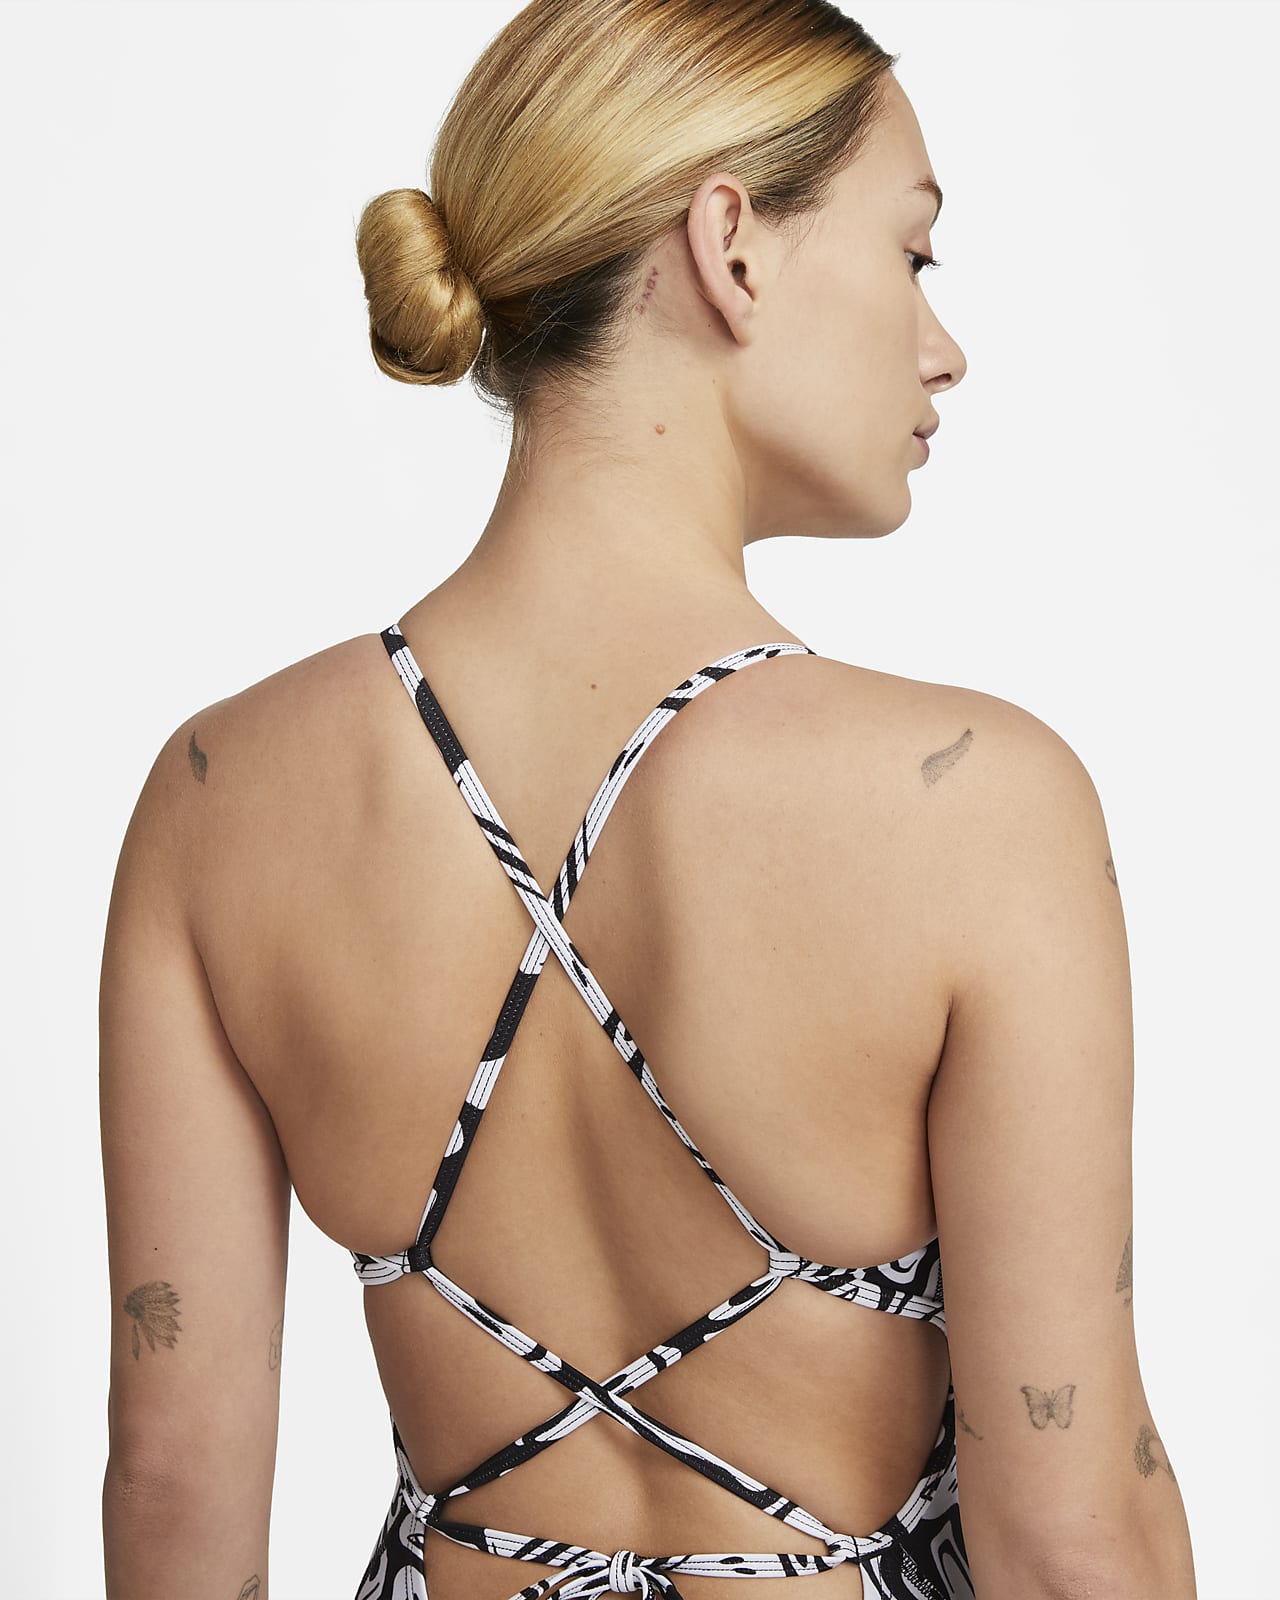 Nike Lace Up Tie Back Swimsuit, Simply Swim